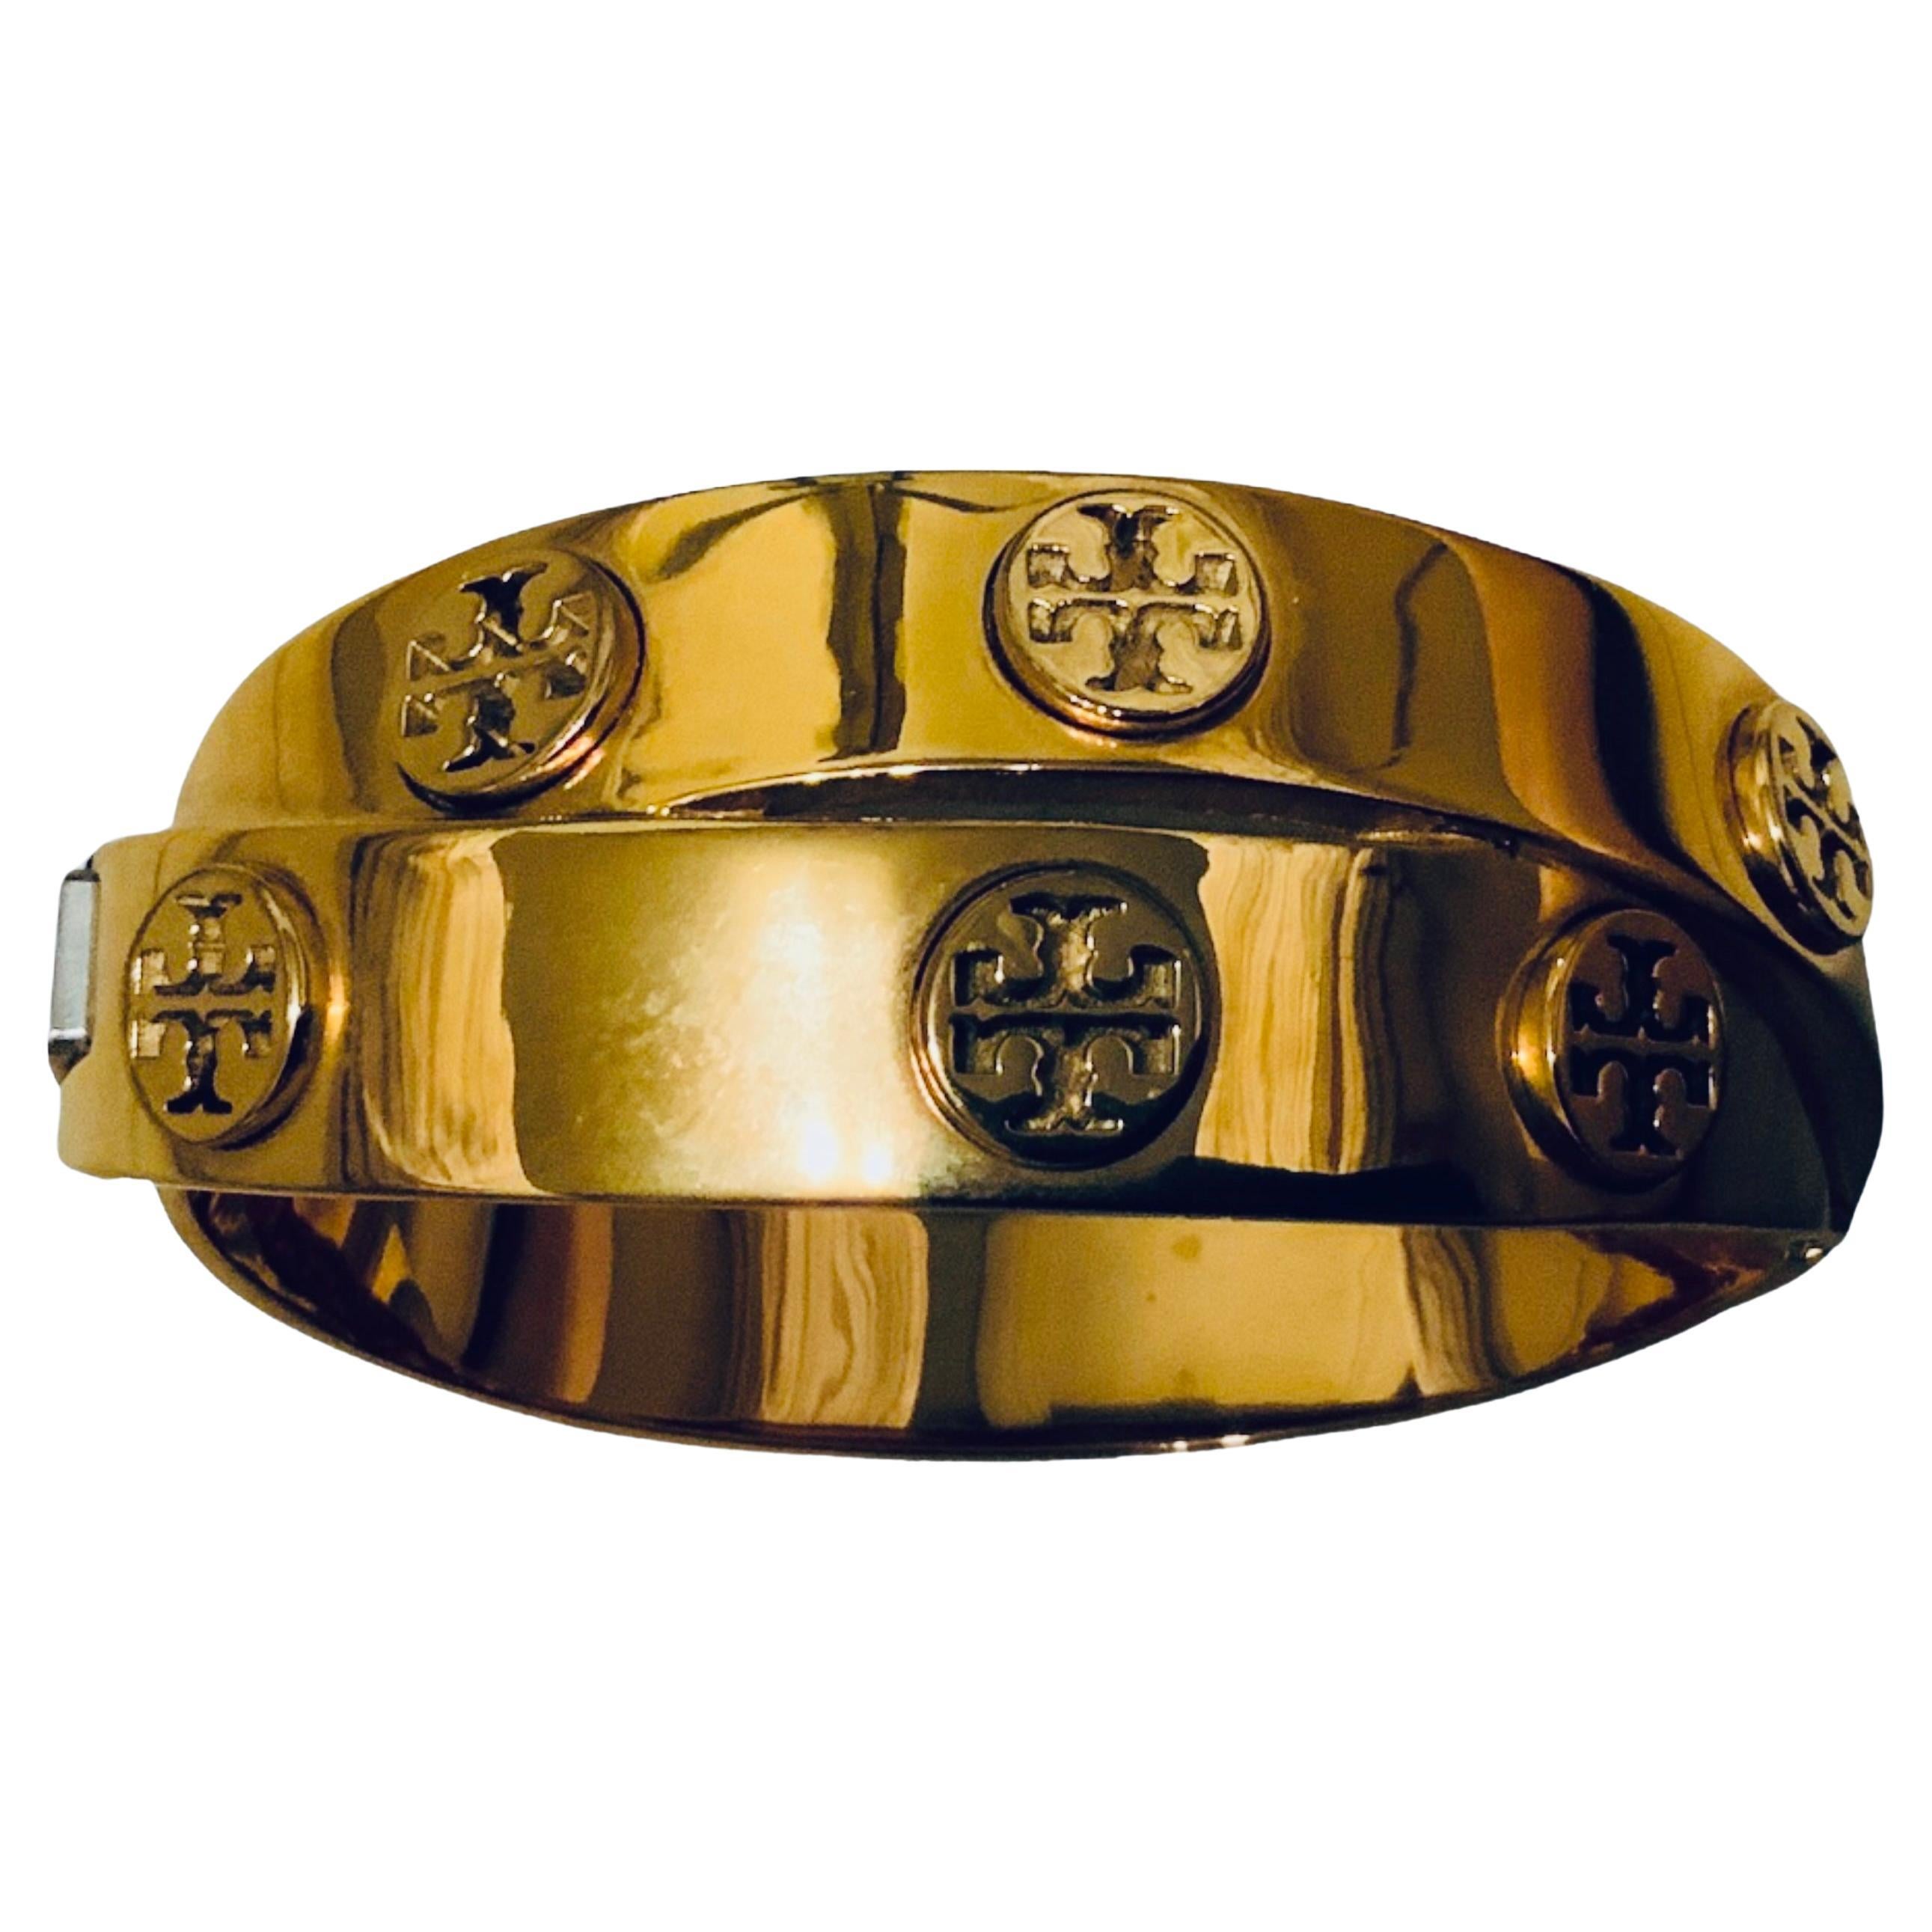 This is a Tory Burch 18K Rose Gold plated Hinged Bangle. It depicts a Tory Burch logo double wrap hinged bangle.